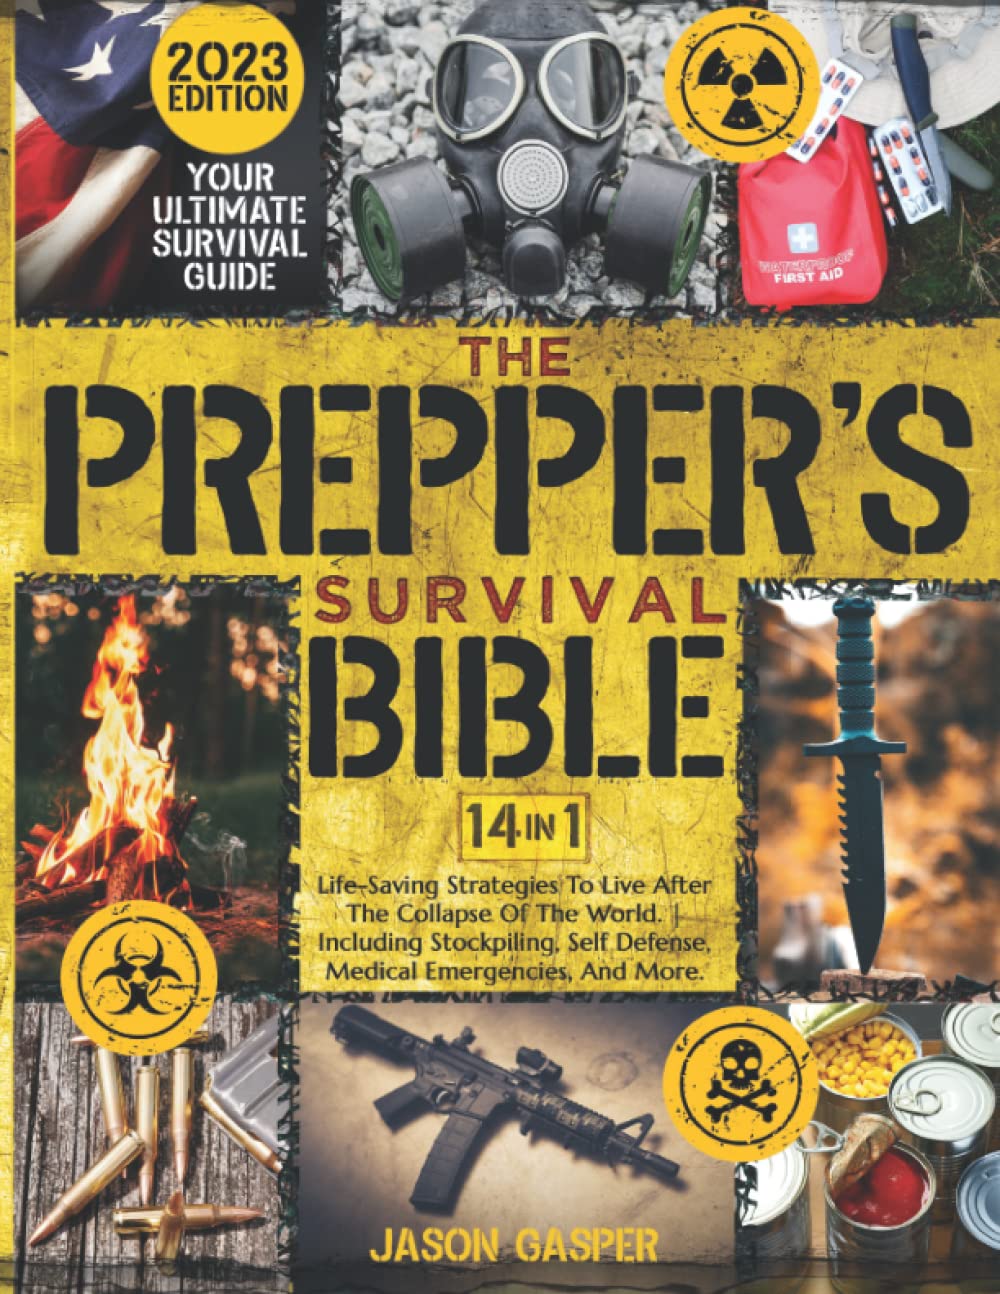 The Prepper’s Survival Bible: 14 in 1: Life-Saving Strategies To Live After The Collapse Of The World. Including Stockpiling, Self Defense, Medical Emergencies, And More. Your Ultimate Survival Guide